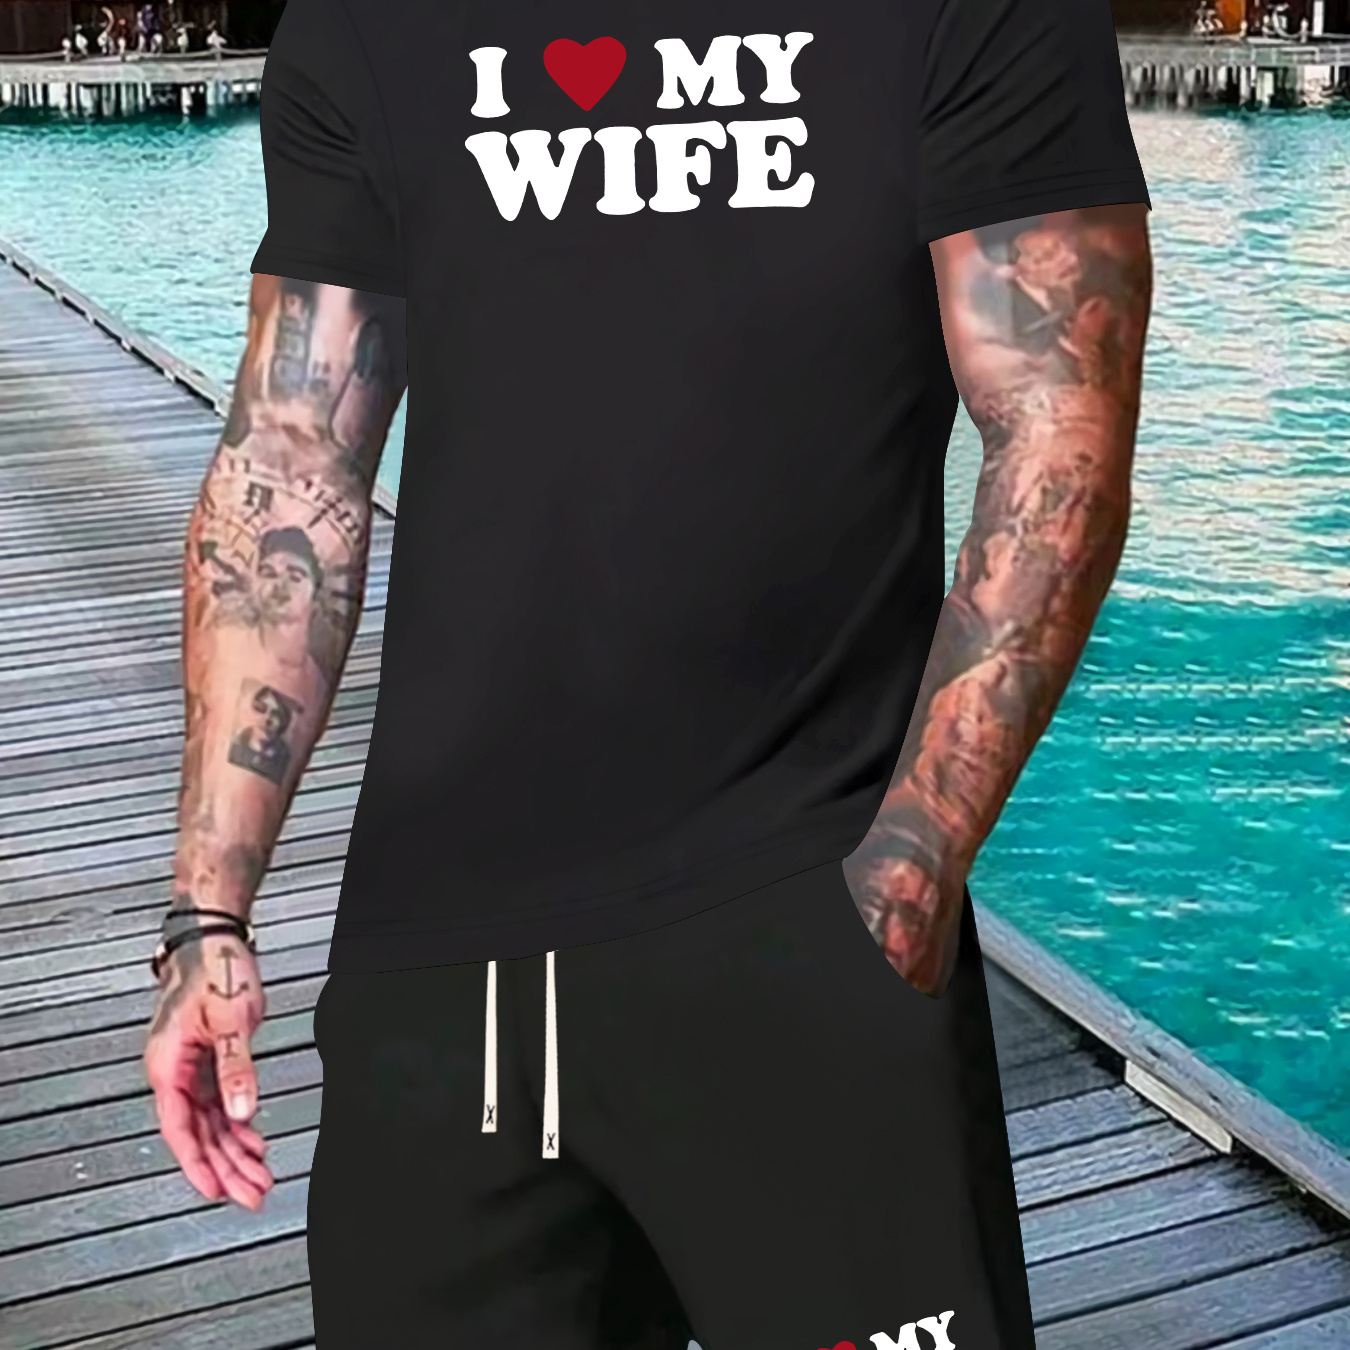 

I Love My Wife And Heart Pattern Print Men's 2 Outfits Short Sleeve T-shirt & Drawstring Shorts Set, Summer Casual Comfy Clothing For Daily Wear